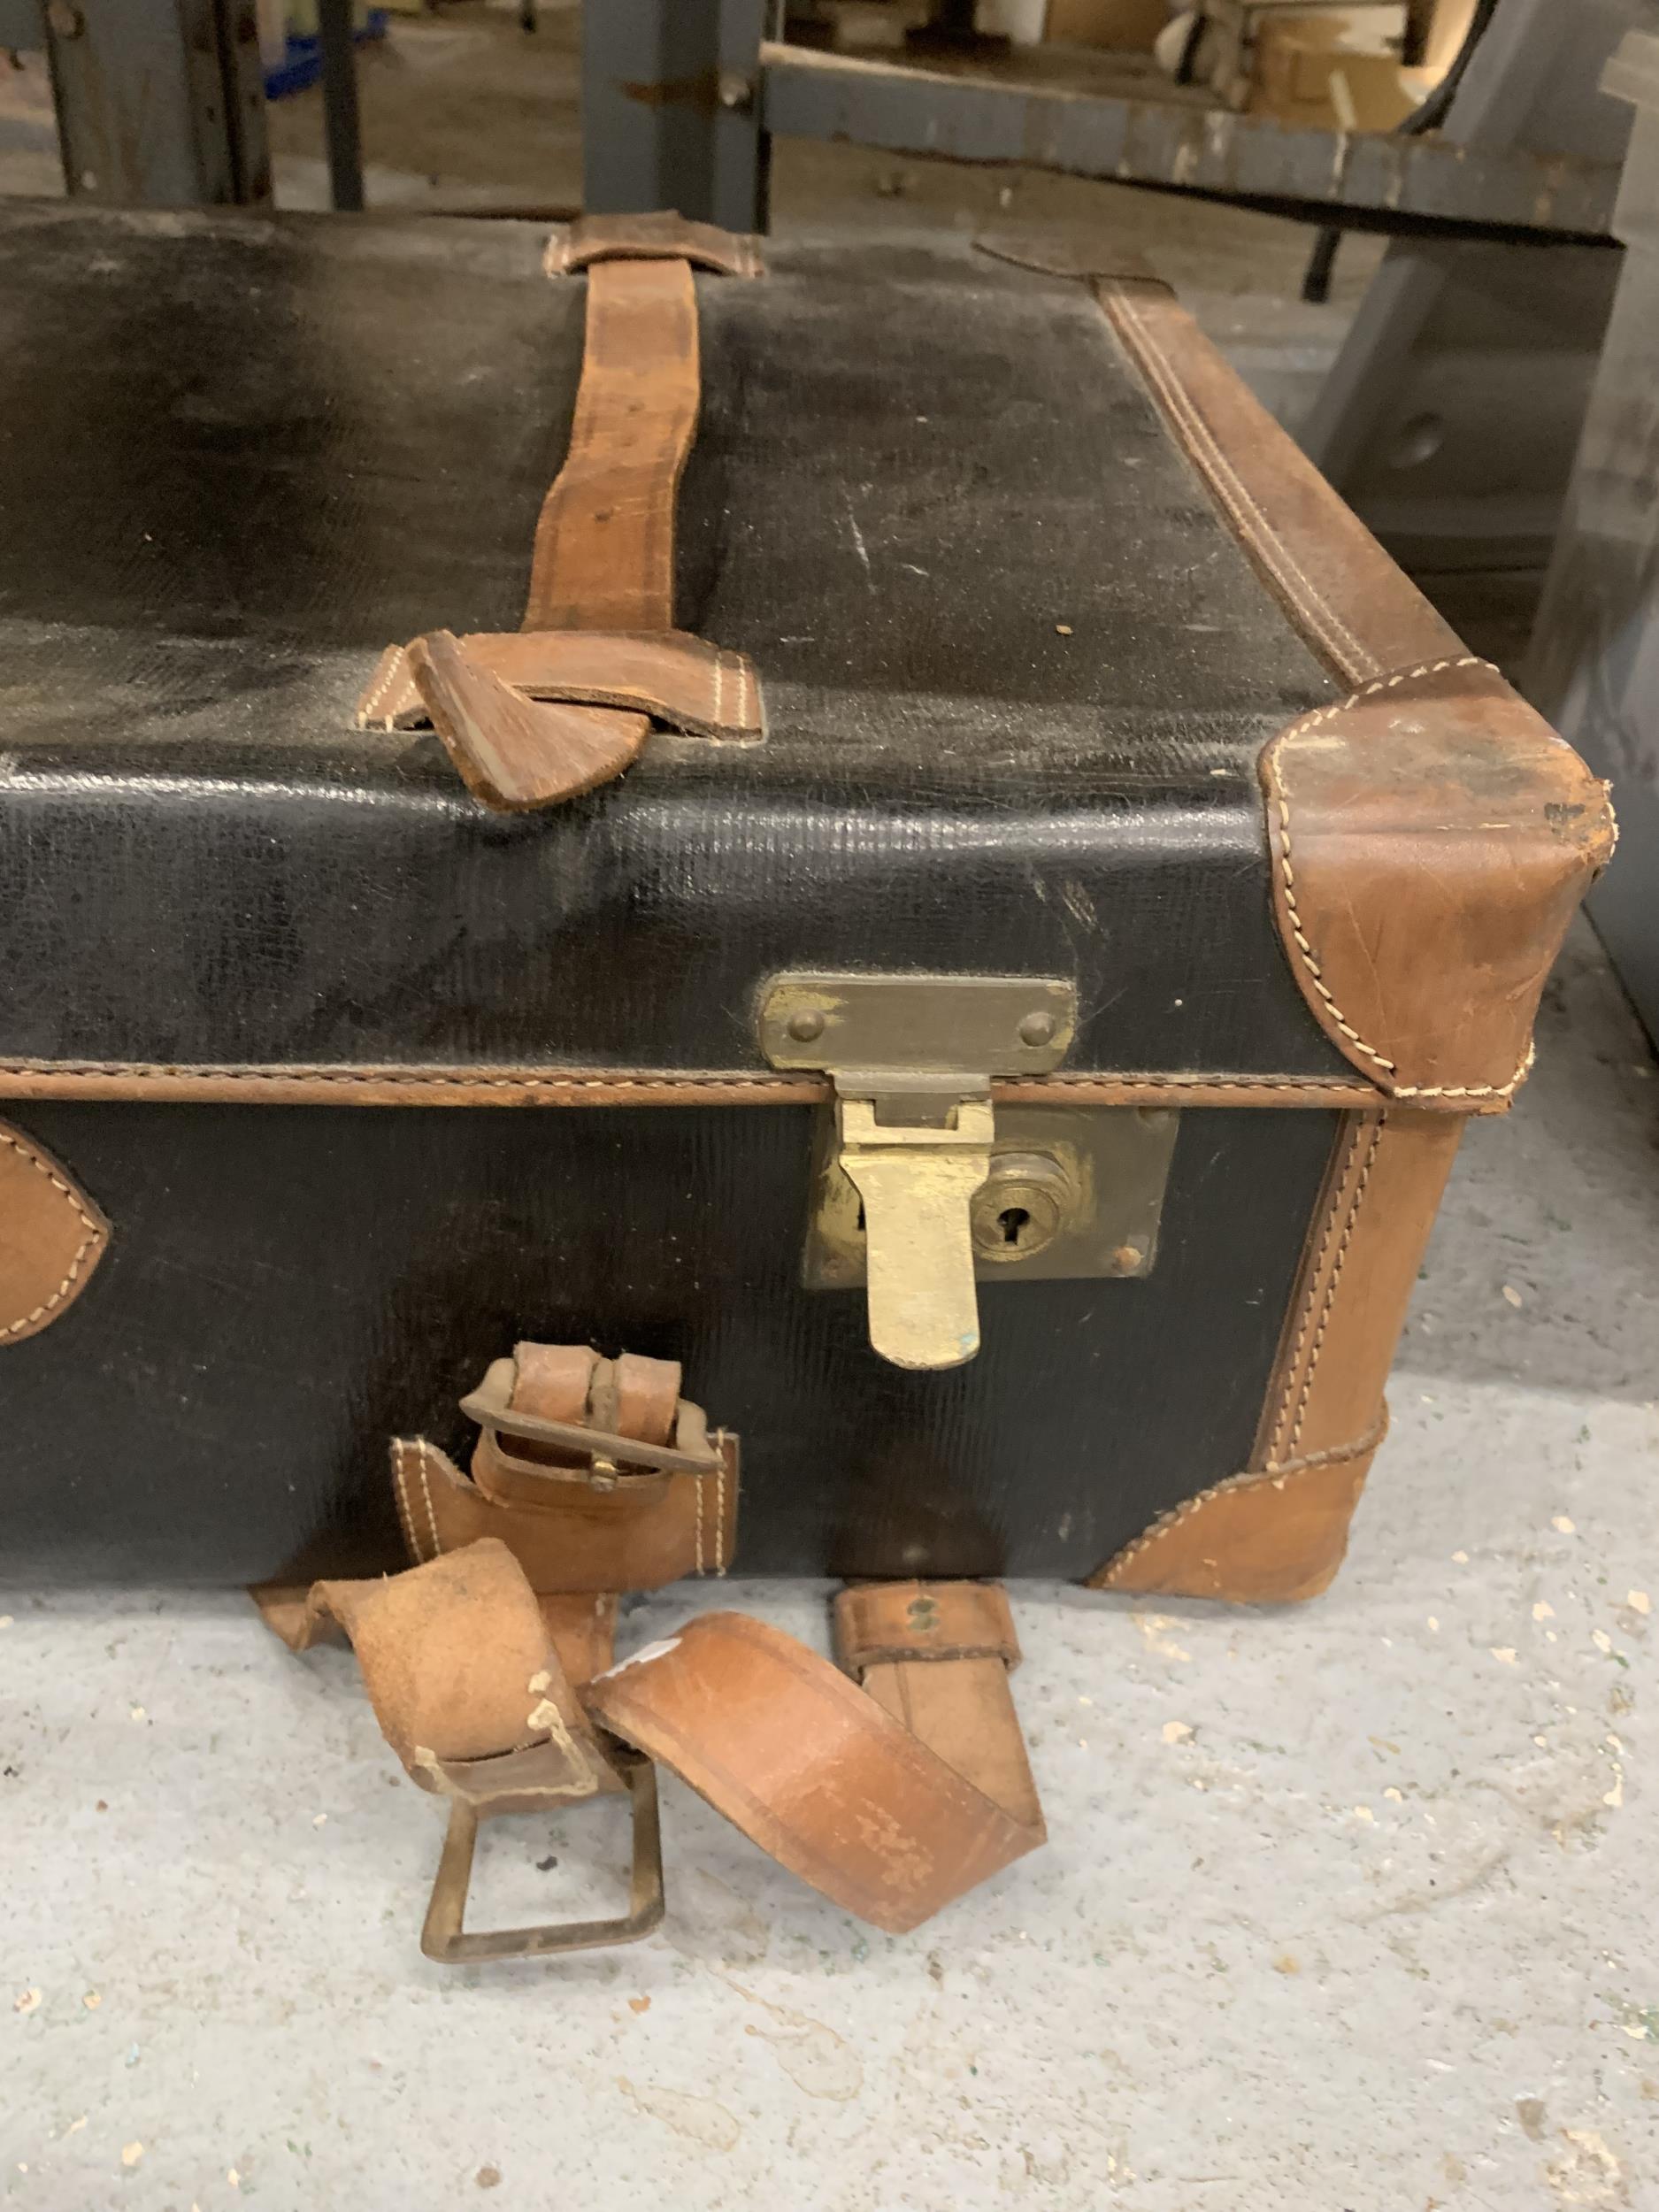 A VINTAGE CANVAS AND LEATHER SUITCASE - Image 3 of 3